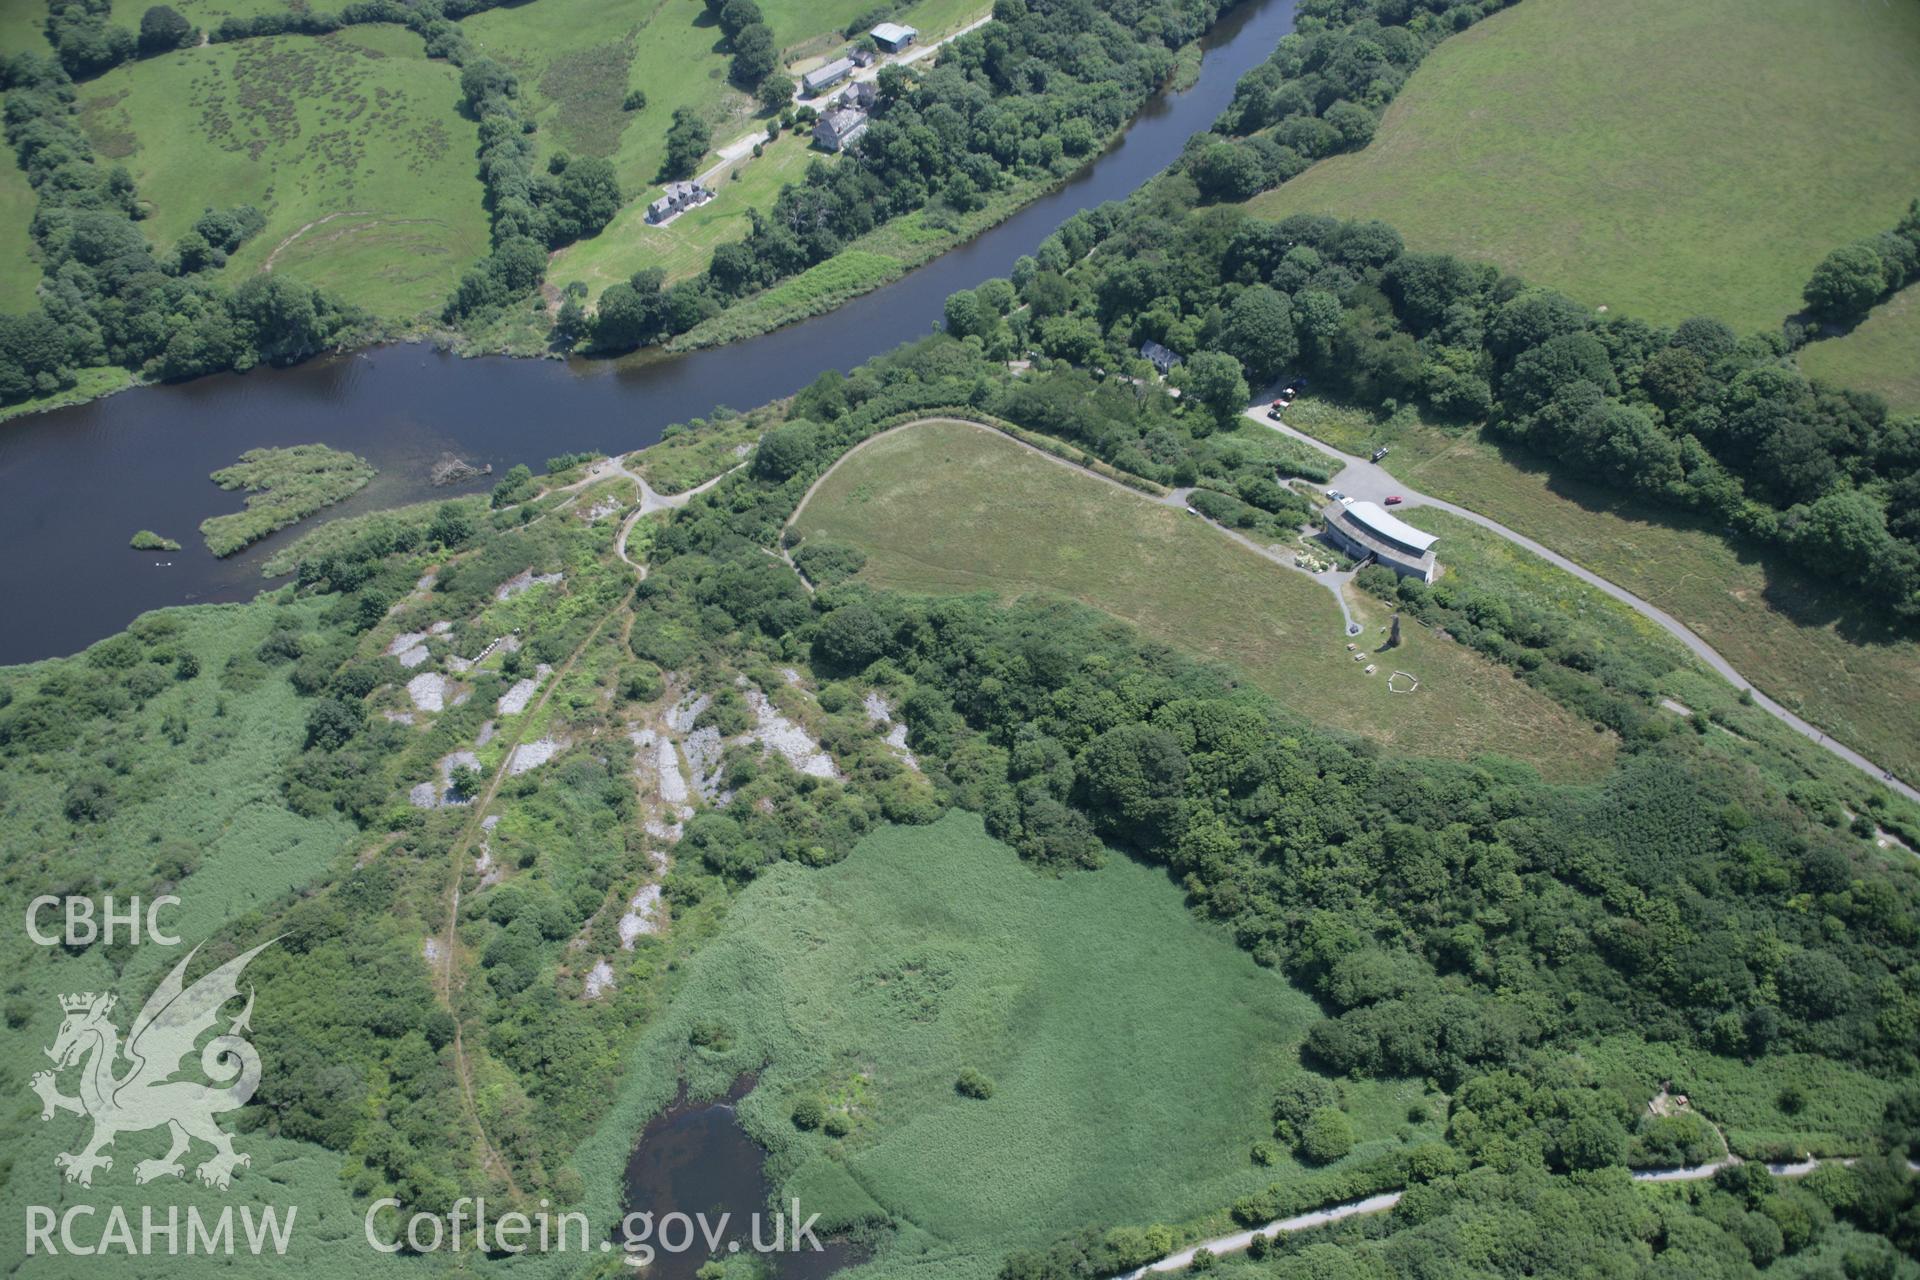 RCAHMW colour oblique aerial photograph of Welsh Wildlife Centre, Cilgerran. Taken on 11 July 2005 by Toby Driver